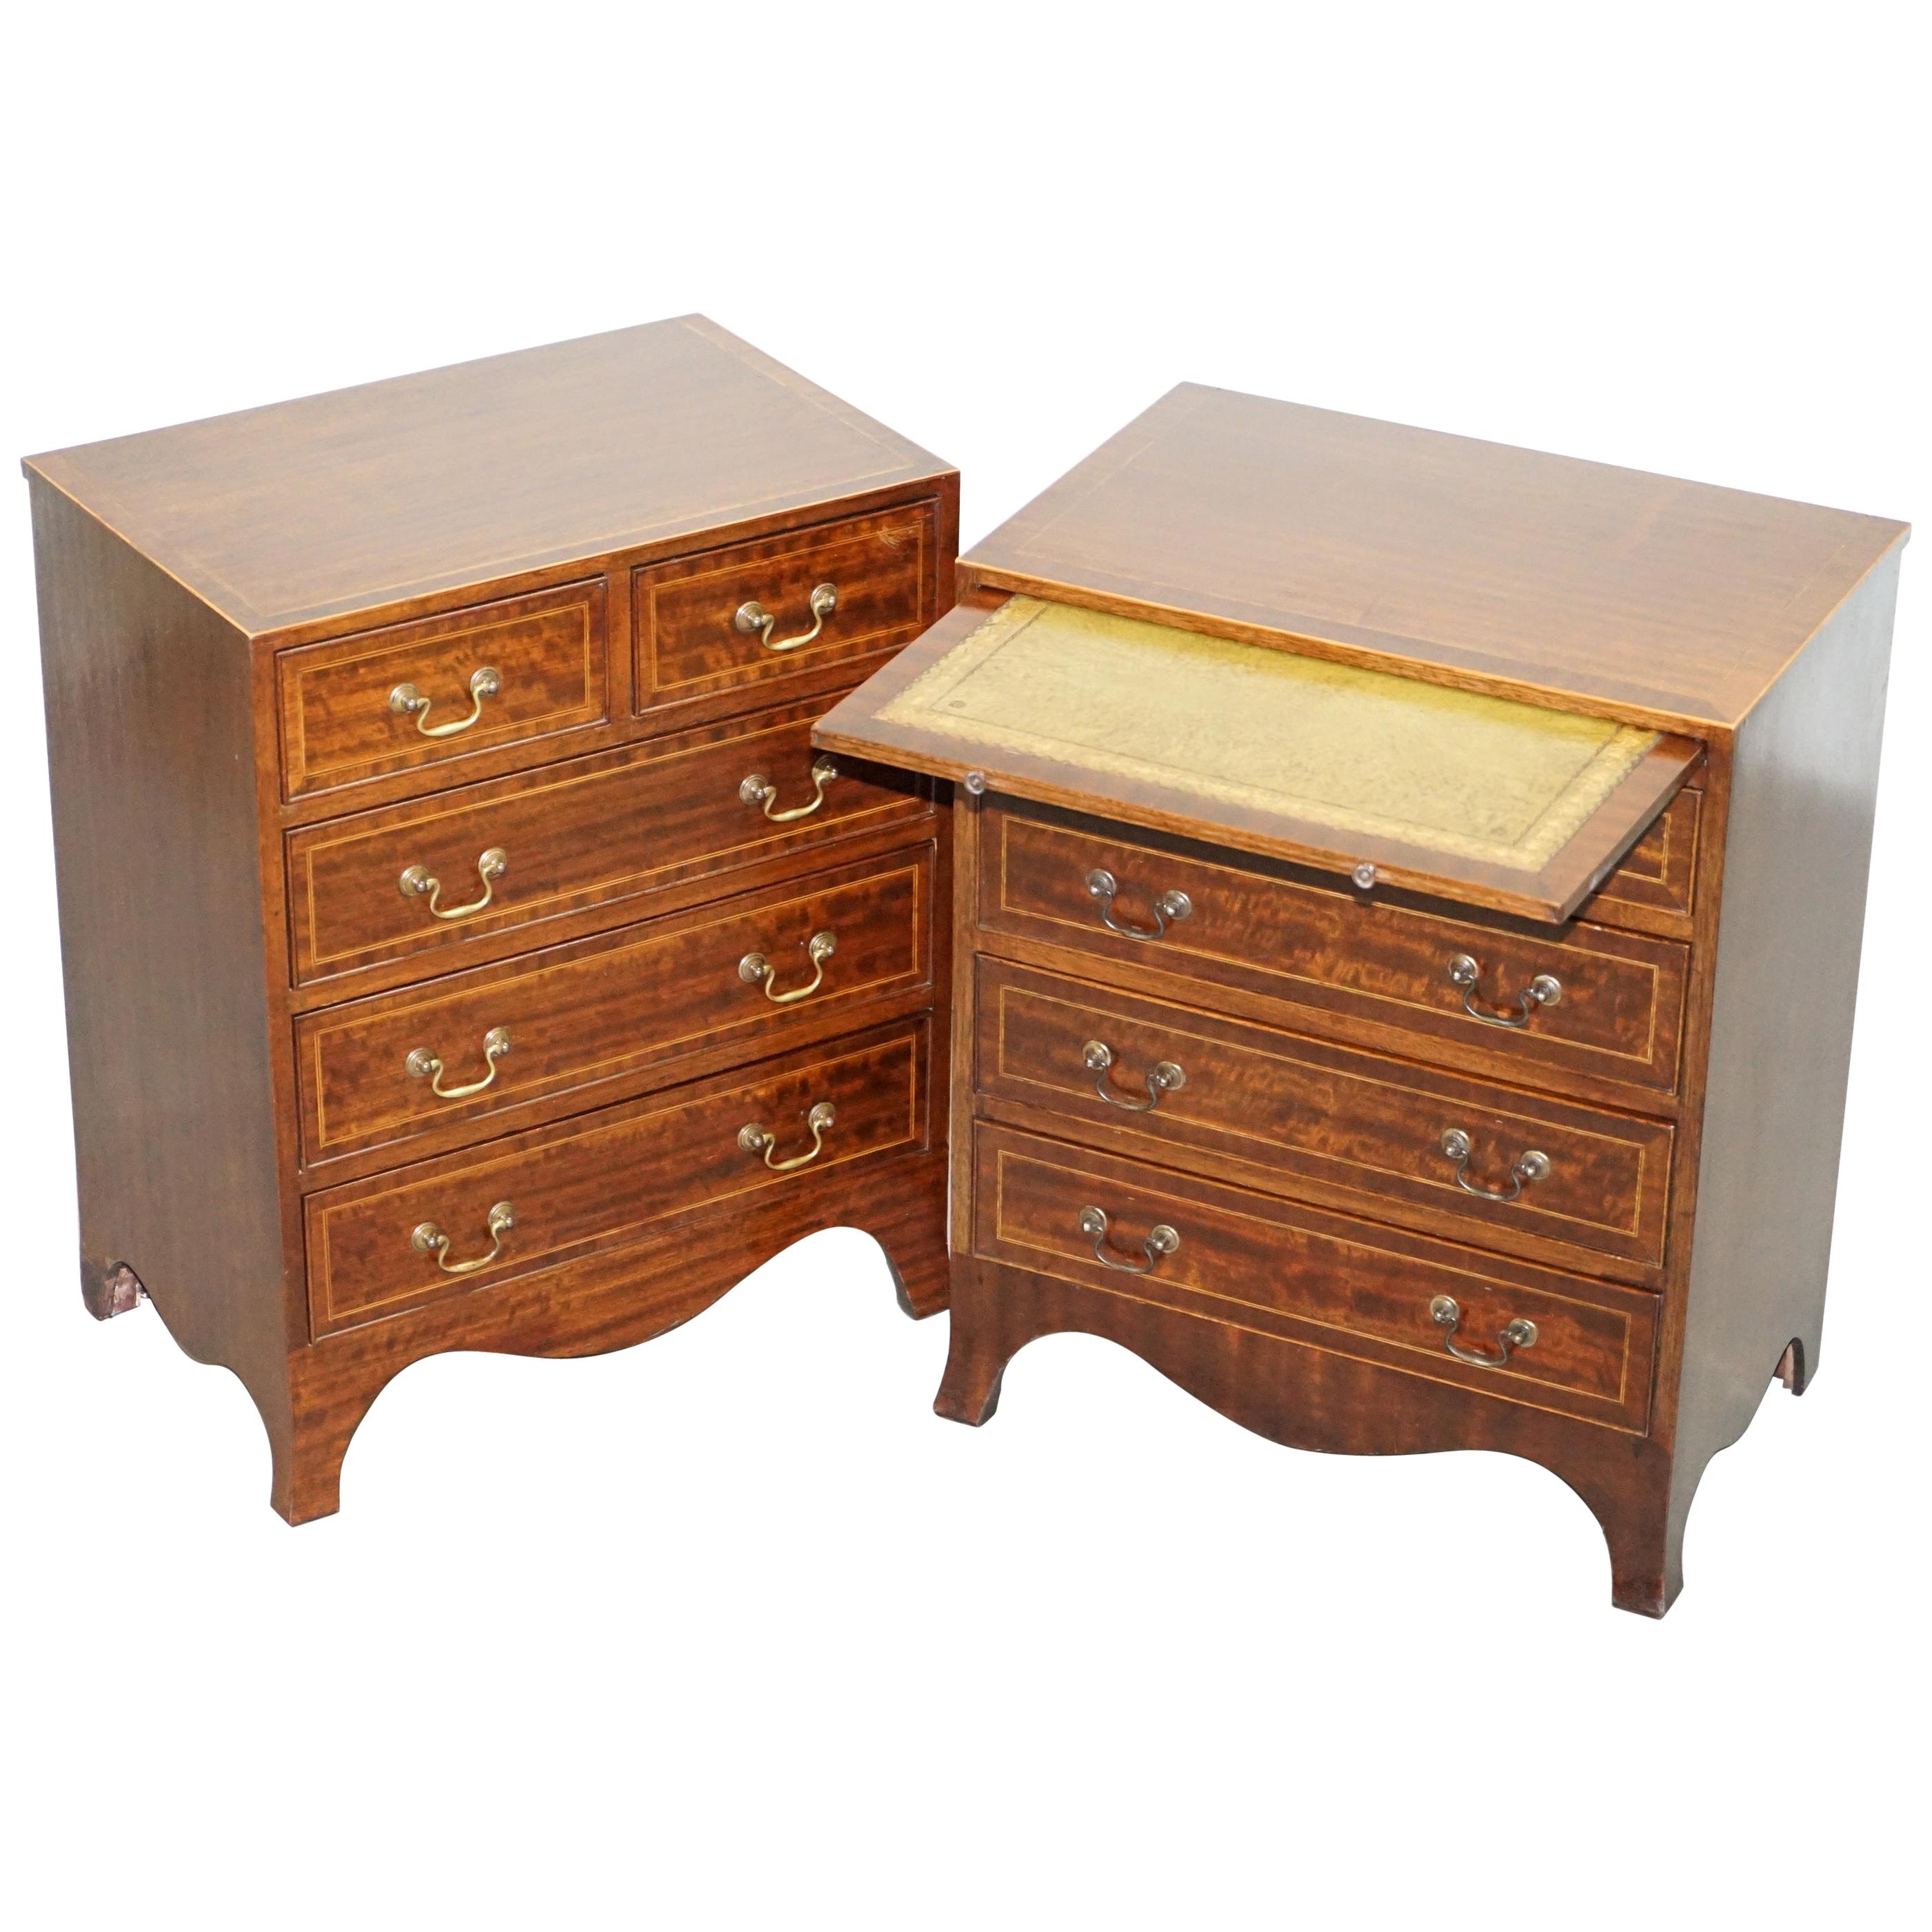 Pair of Stunning Flamed Hardwood Side Table Sized Chests of Drawers Serving Tray